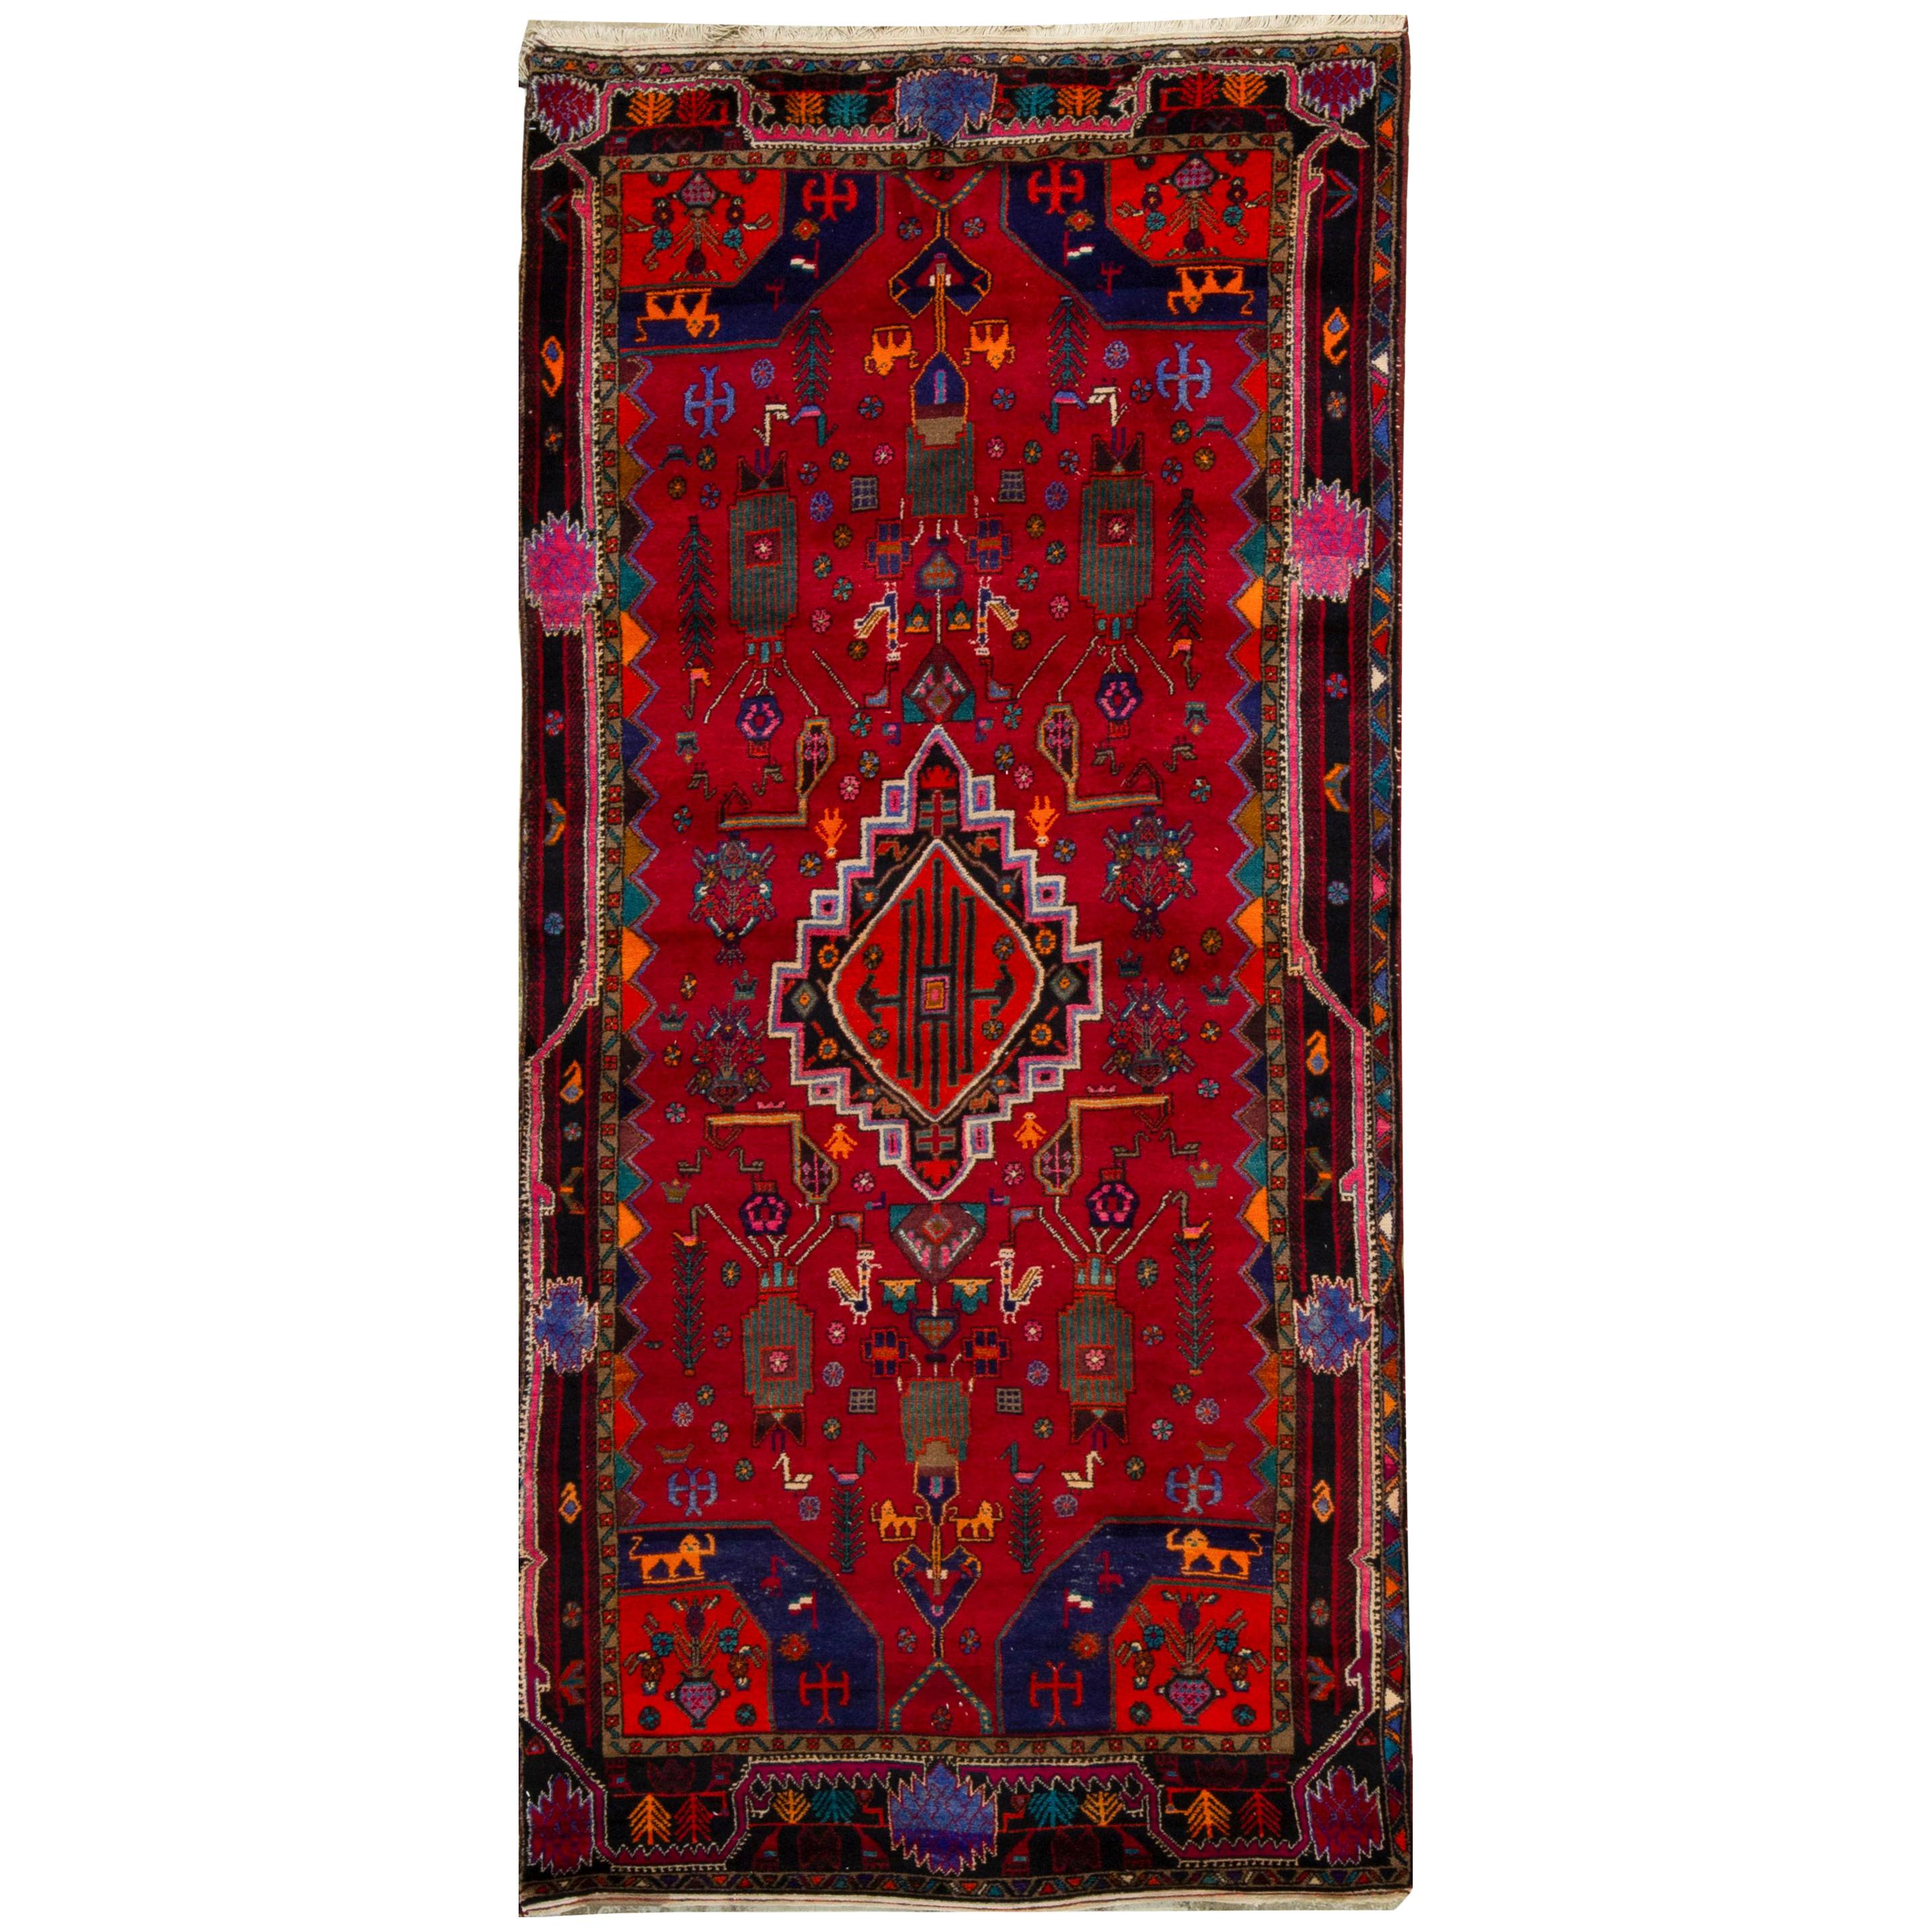 One of a Kind Traditional Handwoven Wool Area Rug   4'6 x 9'7